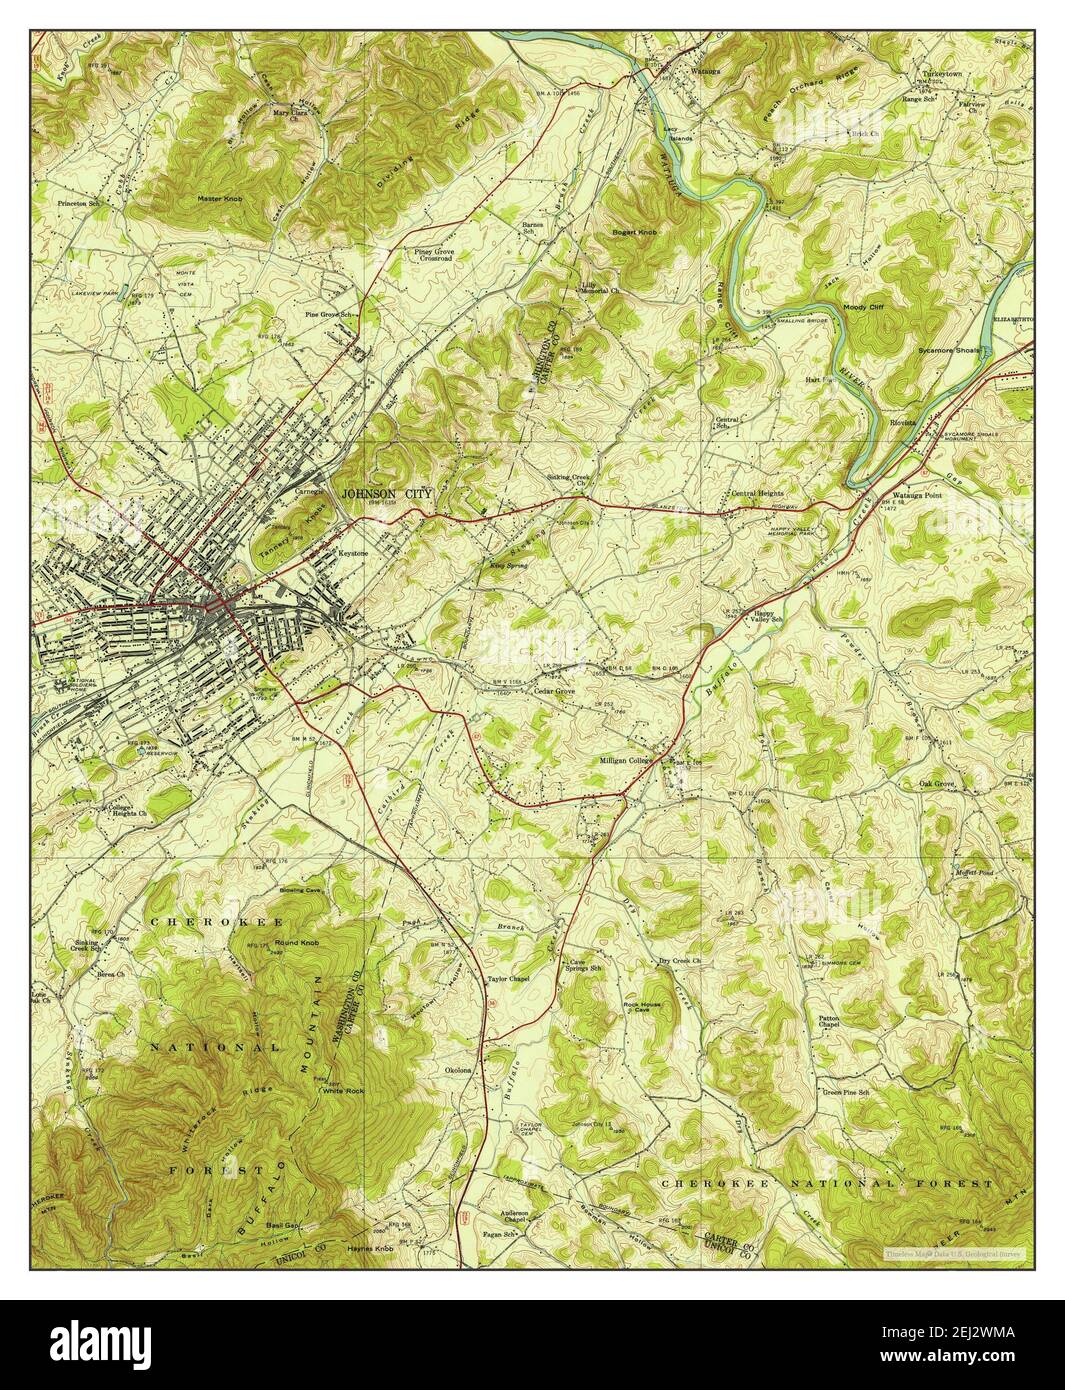 Johnson City, Tennessee, map 1940, 1:24000, United States of America by Timeless Maps, data U.S. Geological Survey Stock Photo